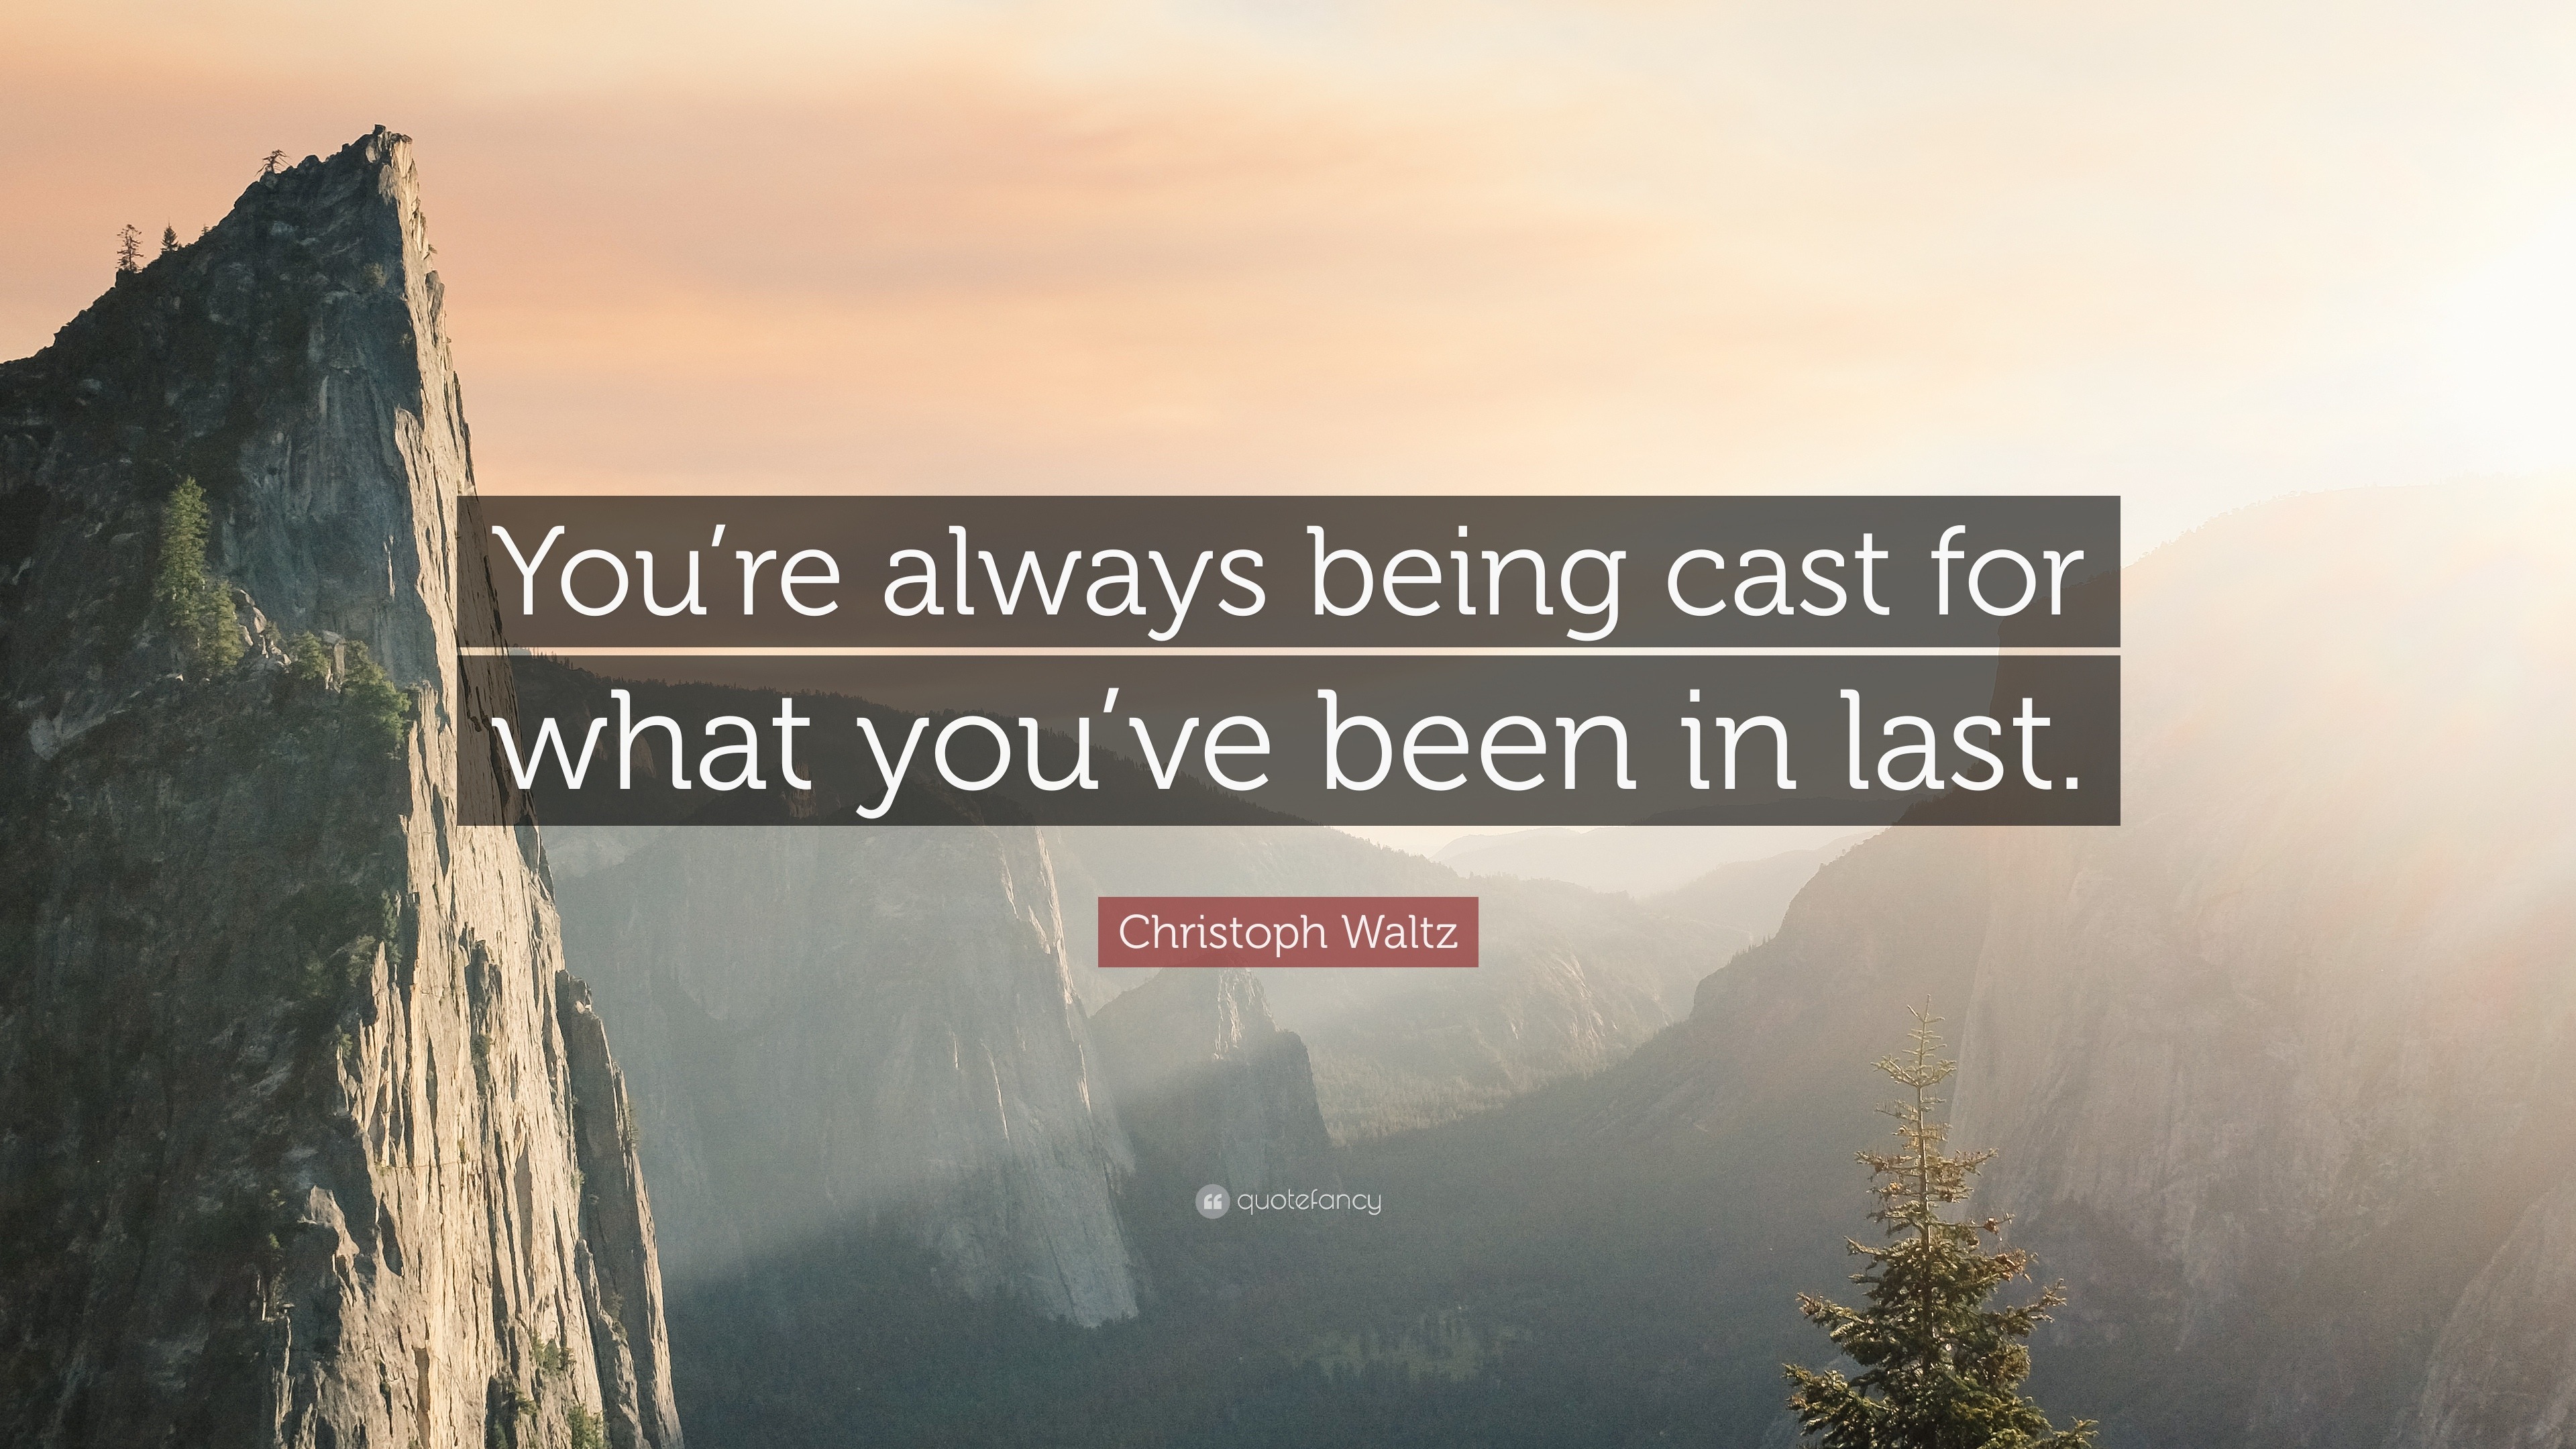 Christoph Waltz Quote: “You’re always being cast for what you’ve been ...